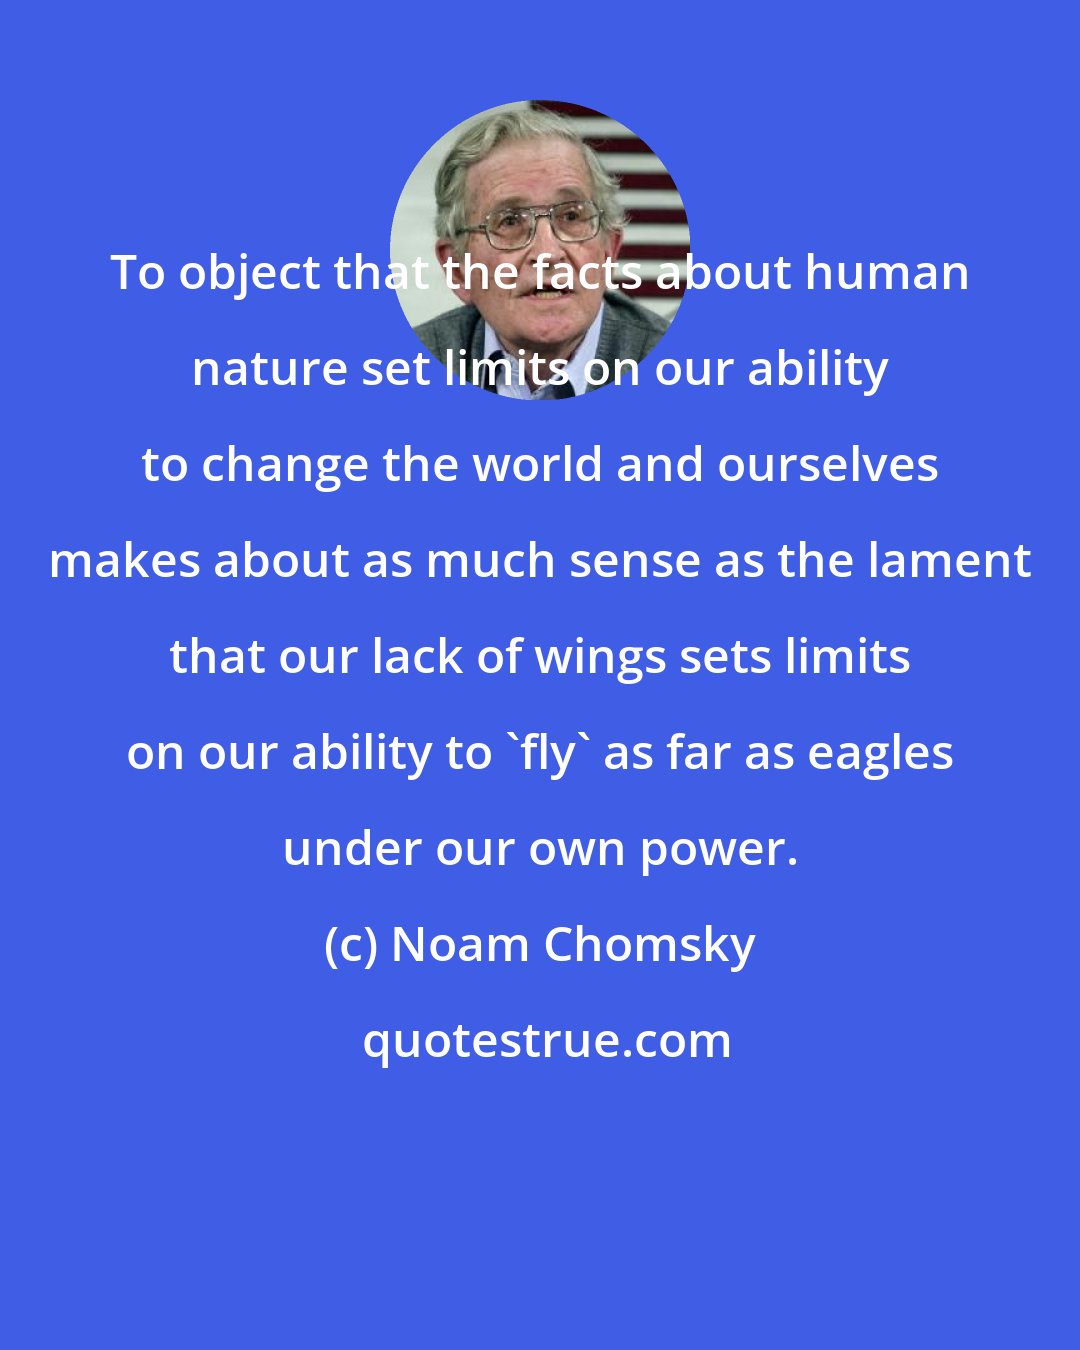 Noam Chomsky: To object that the facts about human nature set limits on our ability to change the world and ourselves makes about as much sense as the lament that our lack of wings sets limits on our ability to 'fly' as far as eagles under our own power.